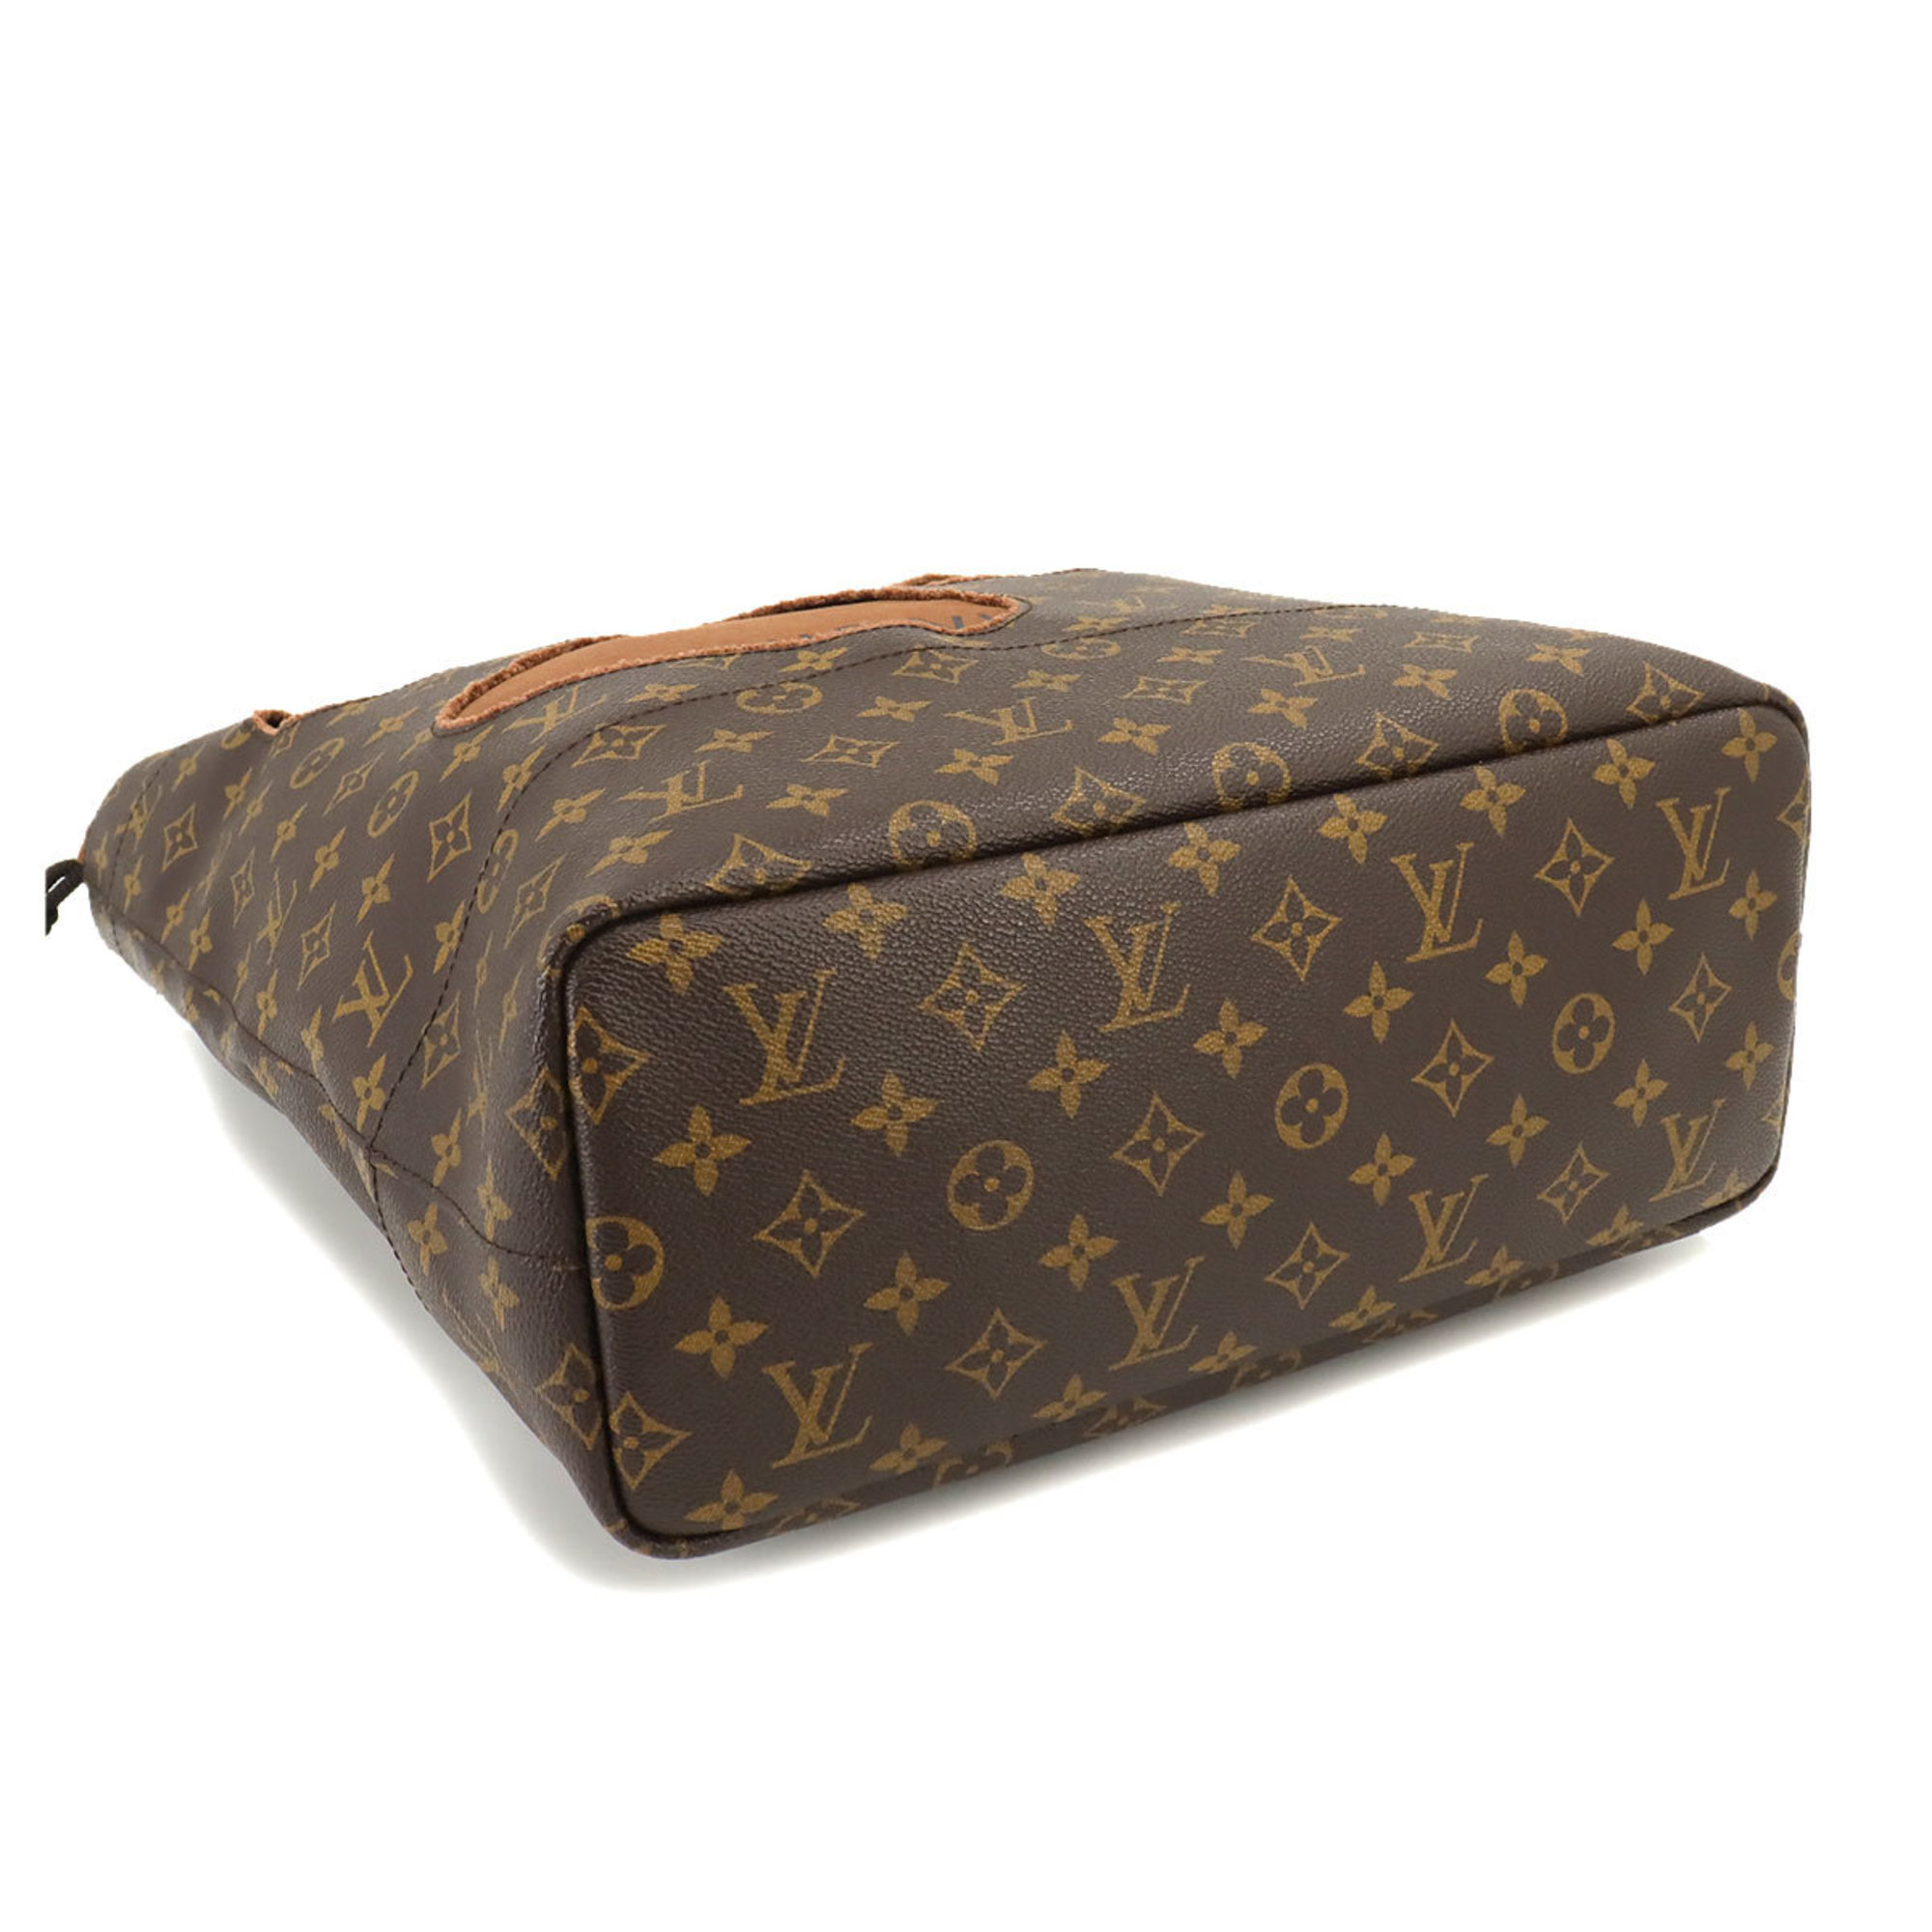 LOUIS VUITTON Monogram with Holes Tote Bag M40279 Limited Comme 